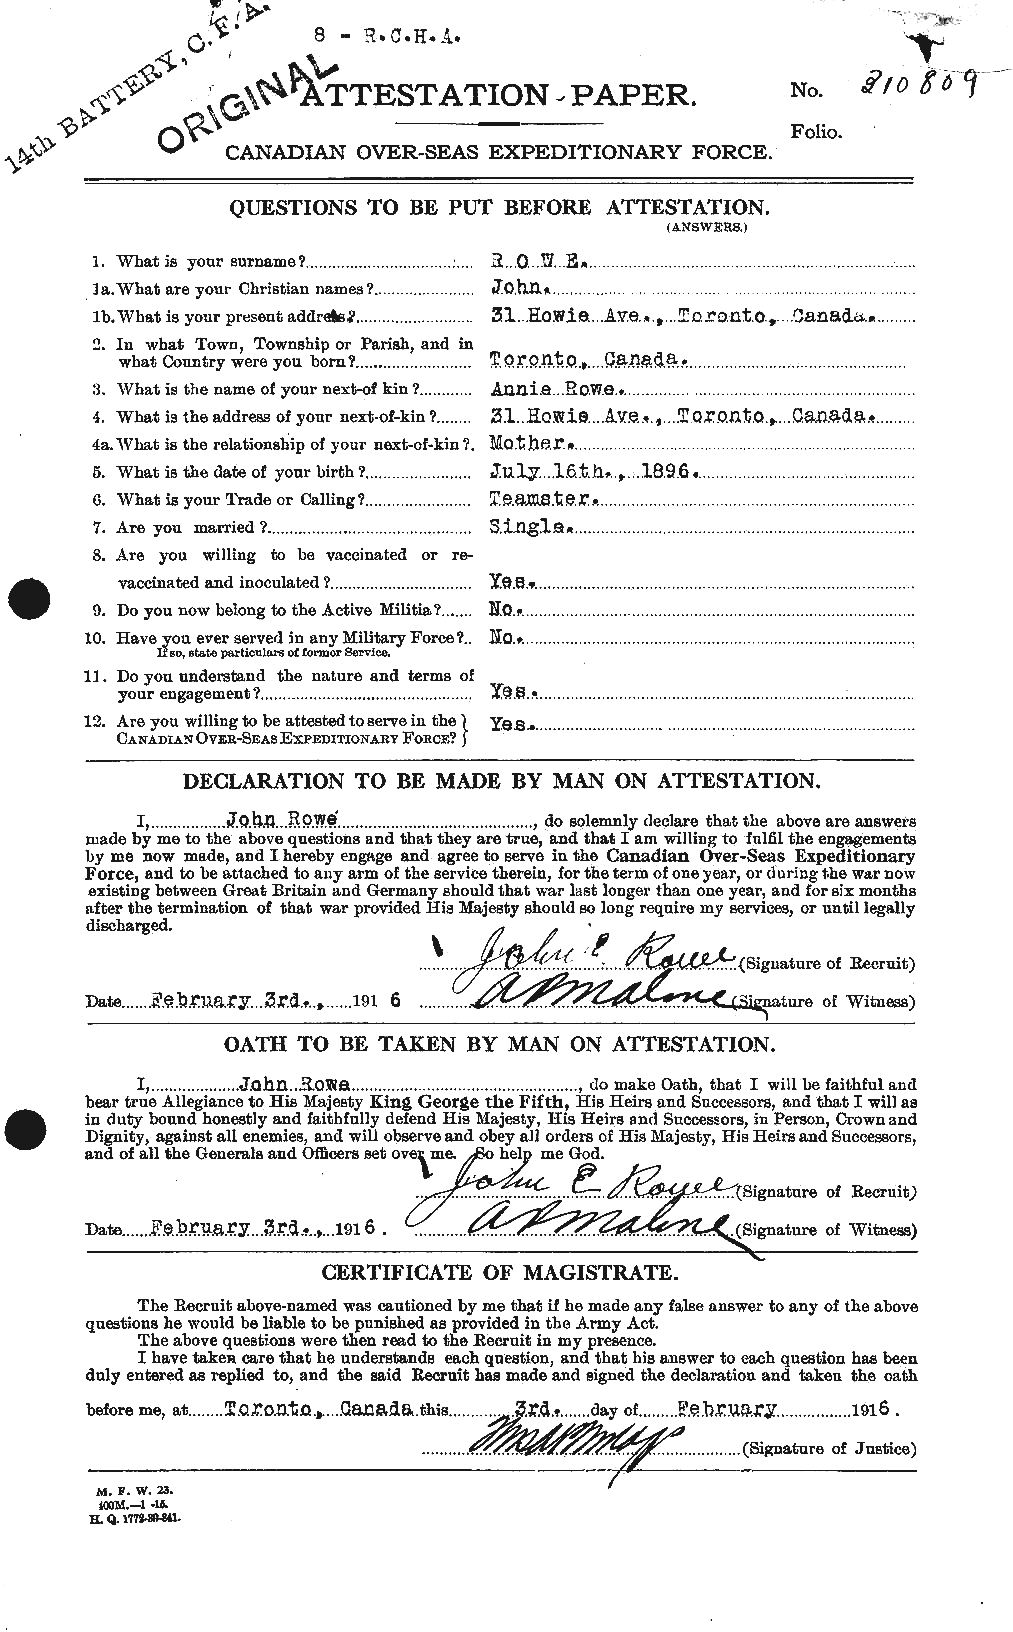 Personnel Records of the First World War - CEF 615922a